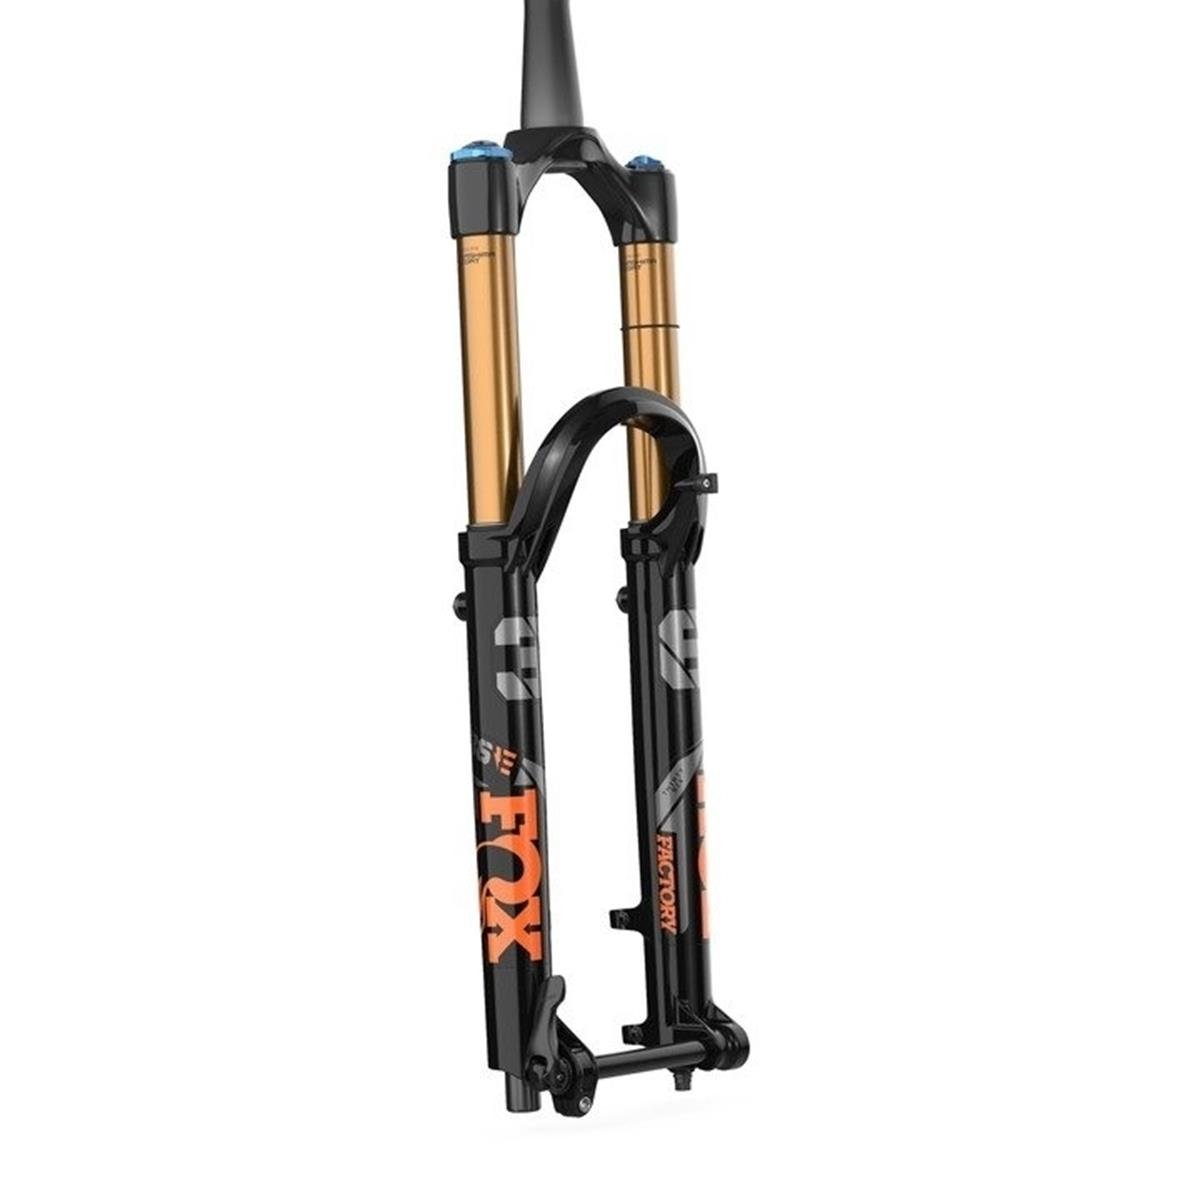 Fox Racing Shox Suspension Fork 36 Float Factory 29 Inches, 15x110 mm, GRIP 2, 51 mm Offset, 160 mm